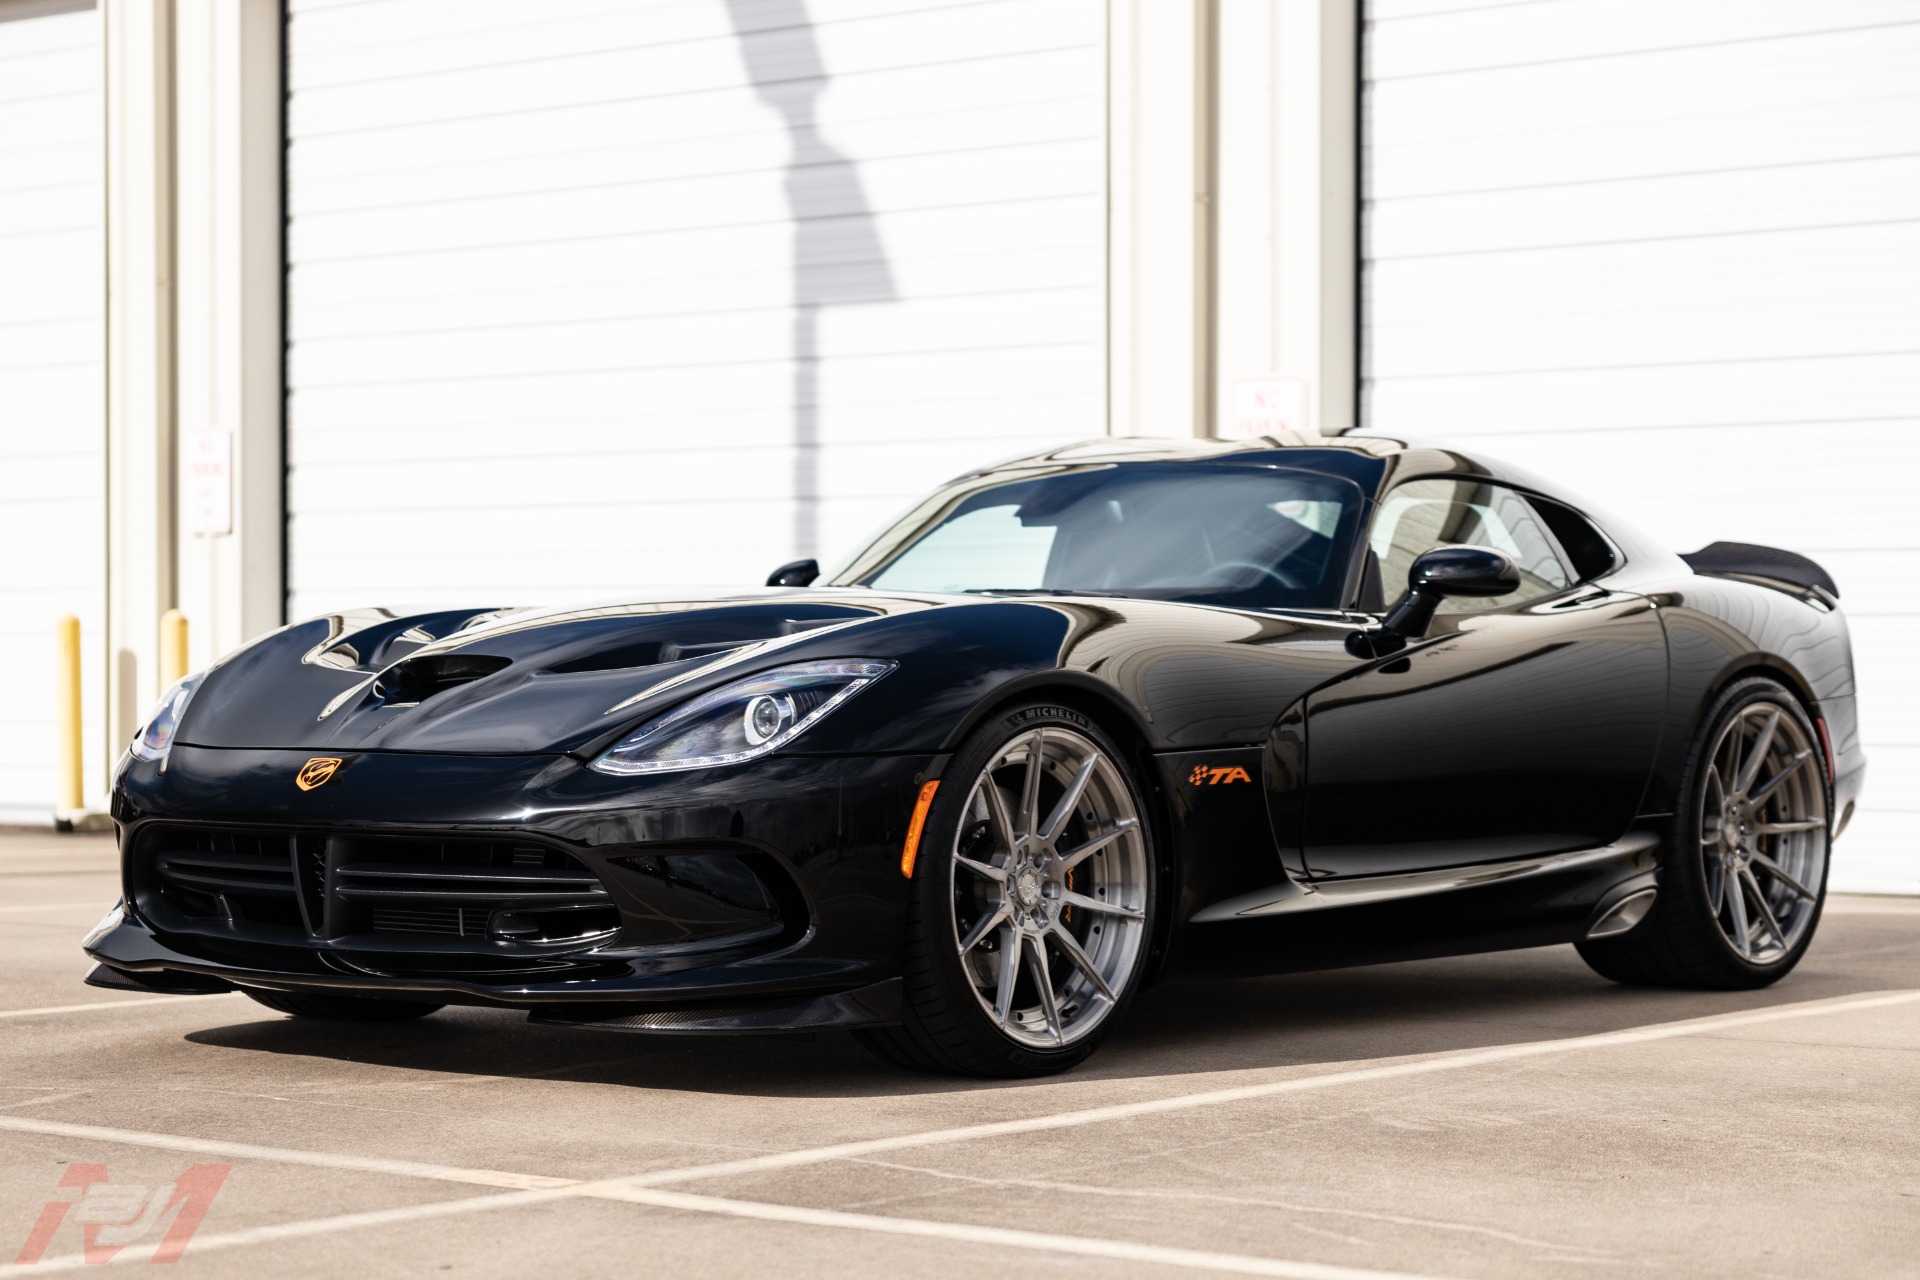 Used 2014 Dodge Viper TA #001 For Sale (Special Pricing) | BJ